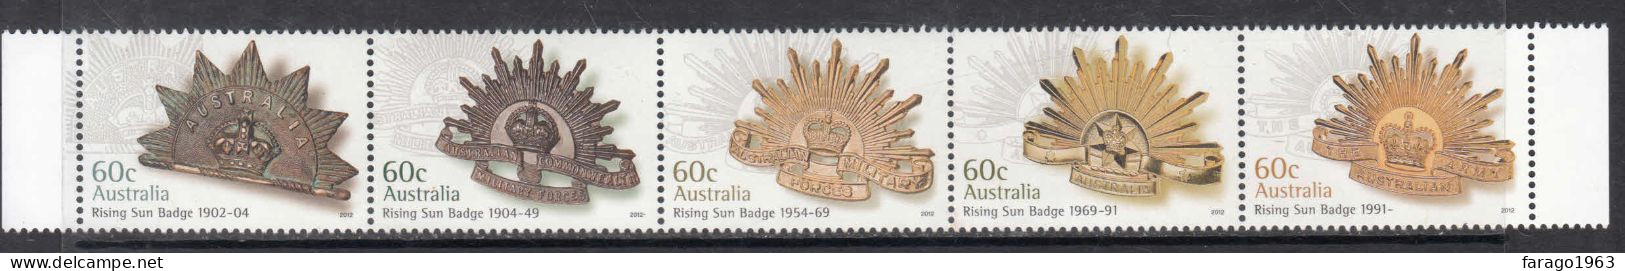 2012 Australia Military Badges Complete Strip Of 5 MNH @ BELOW FACE VALUE - Mint Stamps